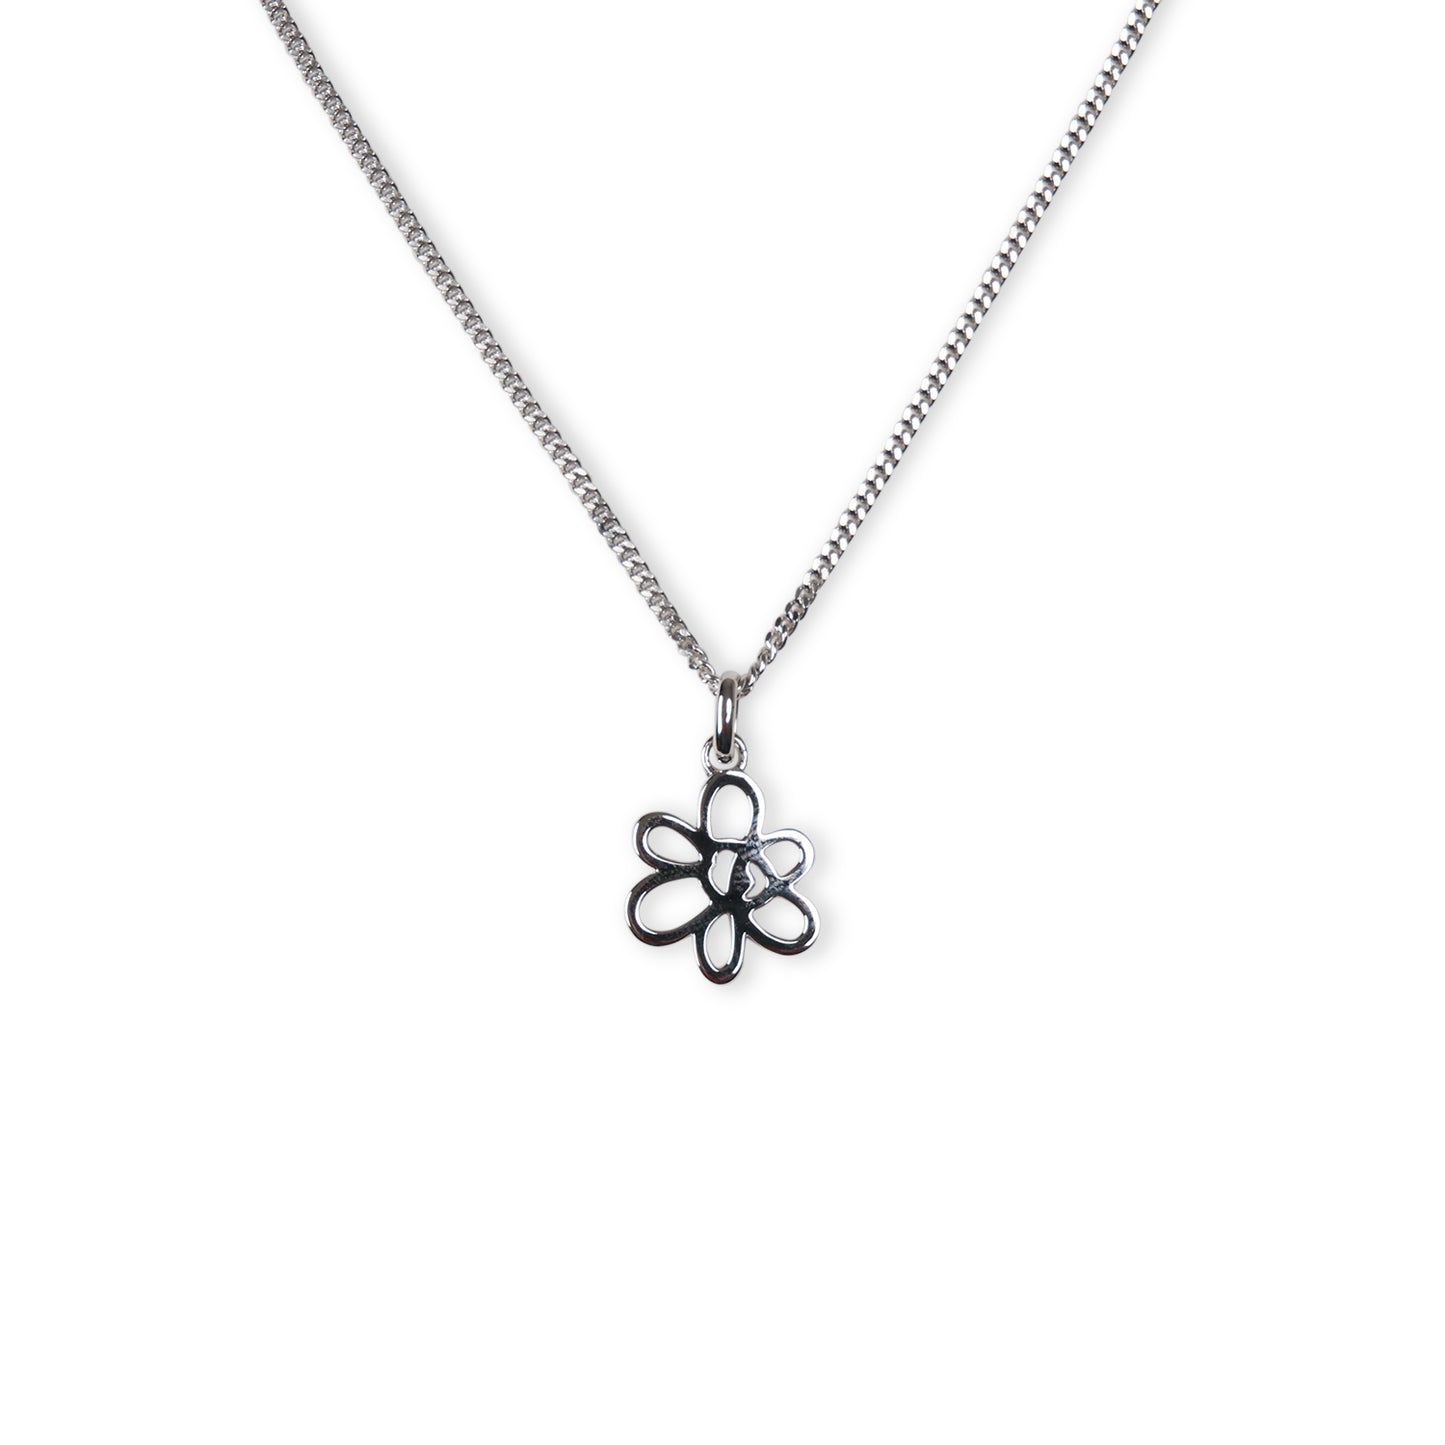 perks and mini p. world silver gestures frame necklace (silver)